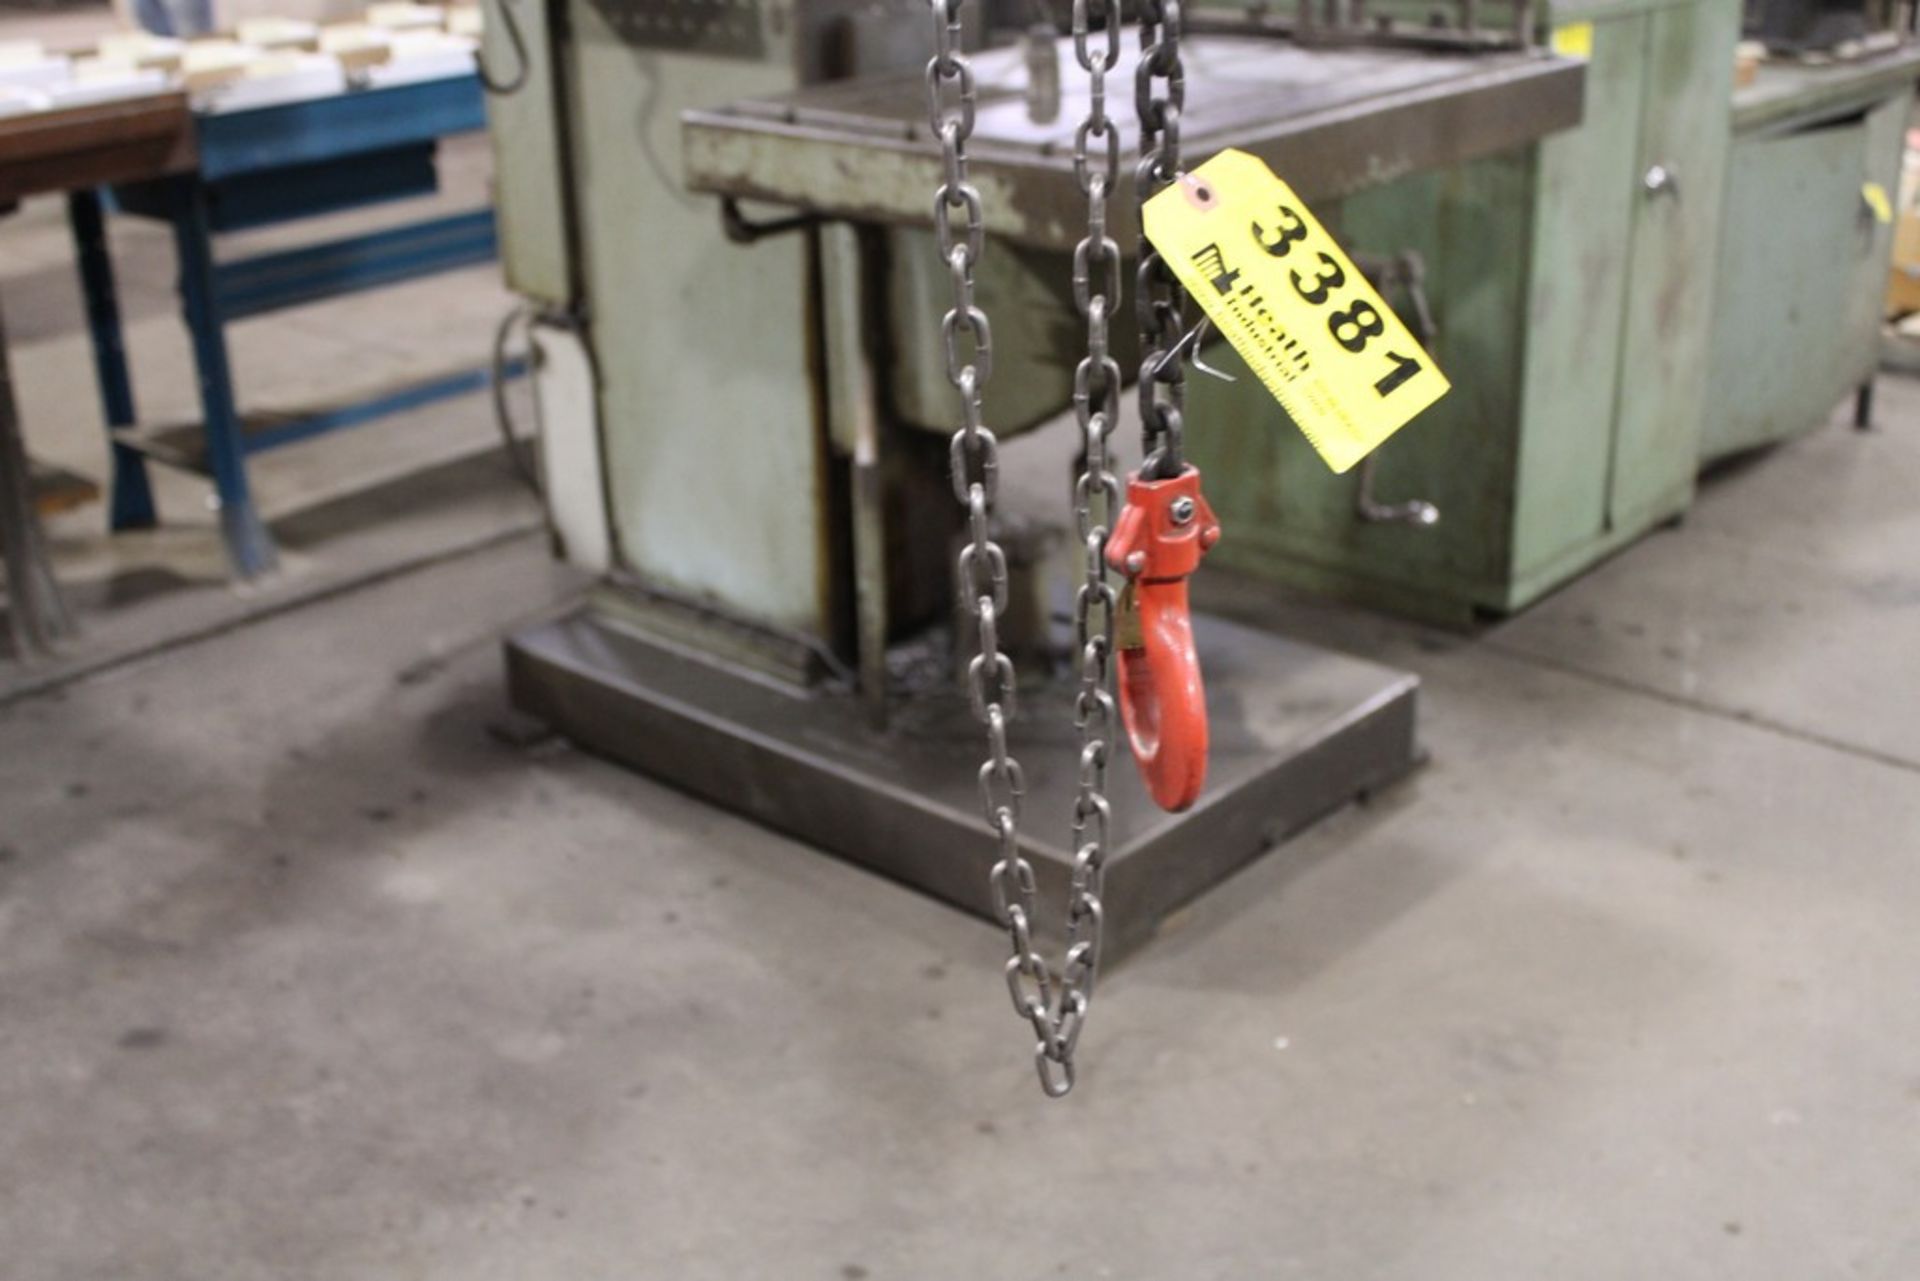 24' I-BEAM WITH COFFING 1 TON MANUAL CHAIN HOIST & TROLLEY (CAN LEAVE I-BEAM) - Image 4 of 4